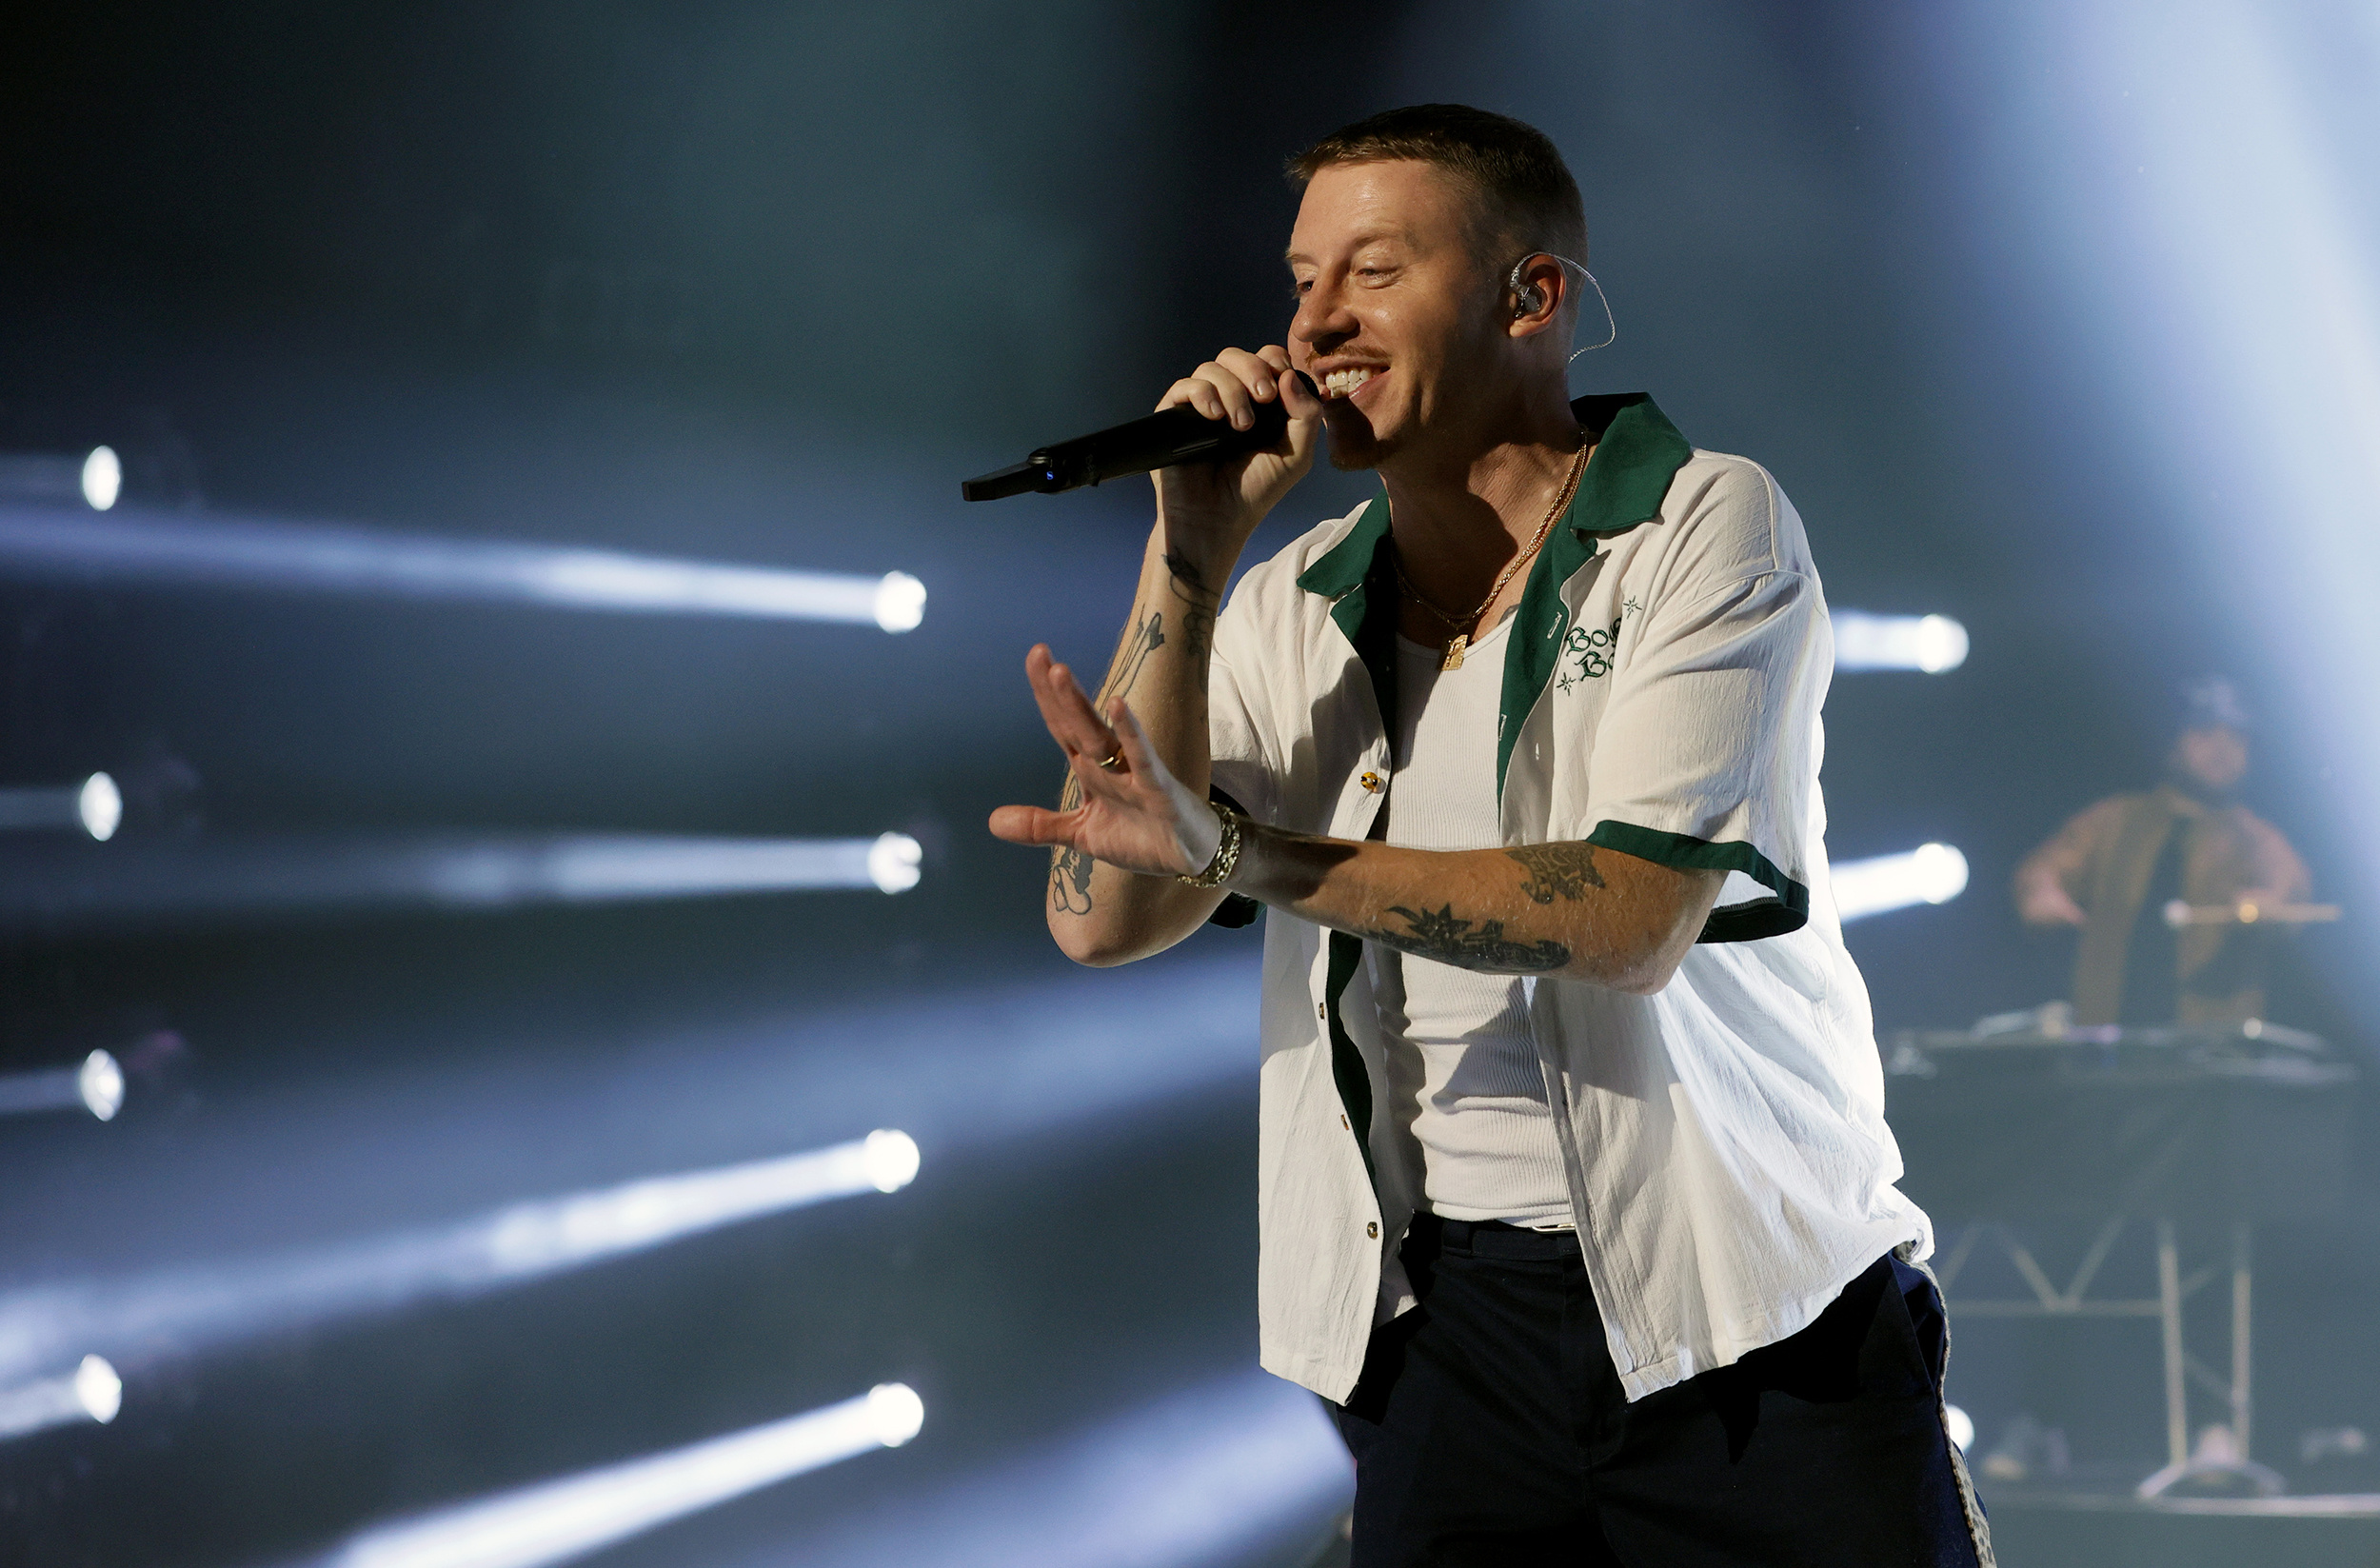 Macklemore relapse, Personal struggles, Recovery journey, Overcoming addiction, 2500x1650 HD Desktop